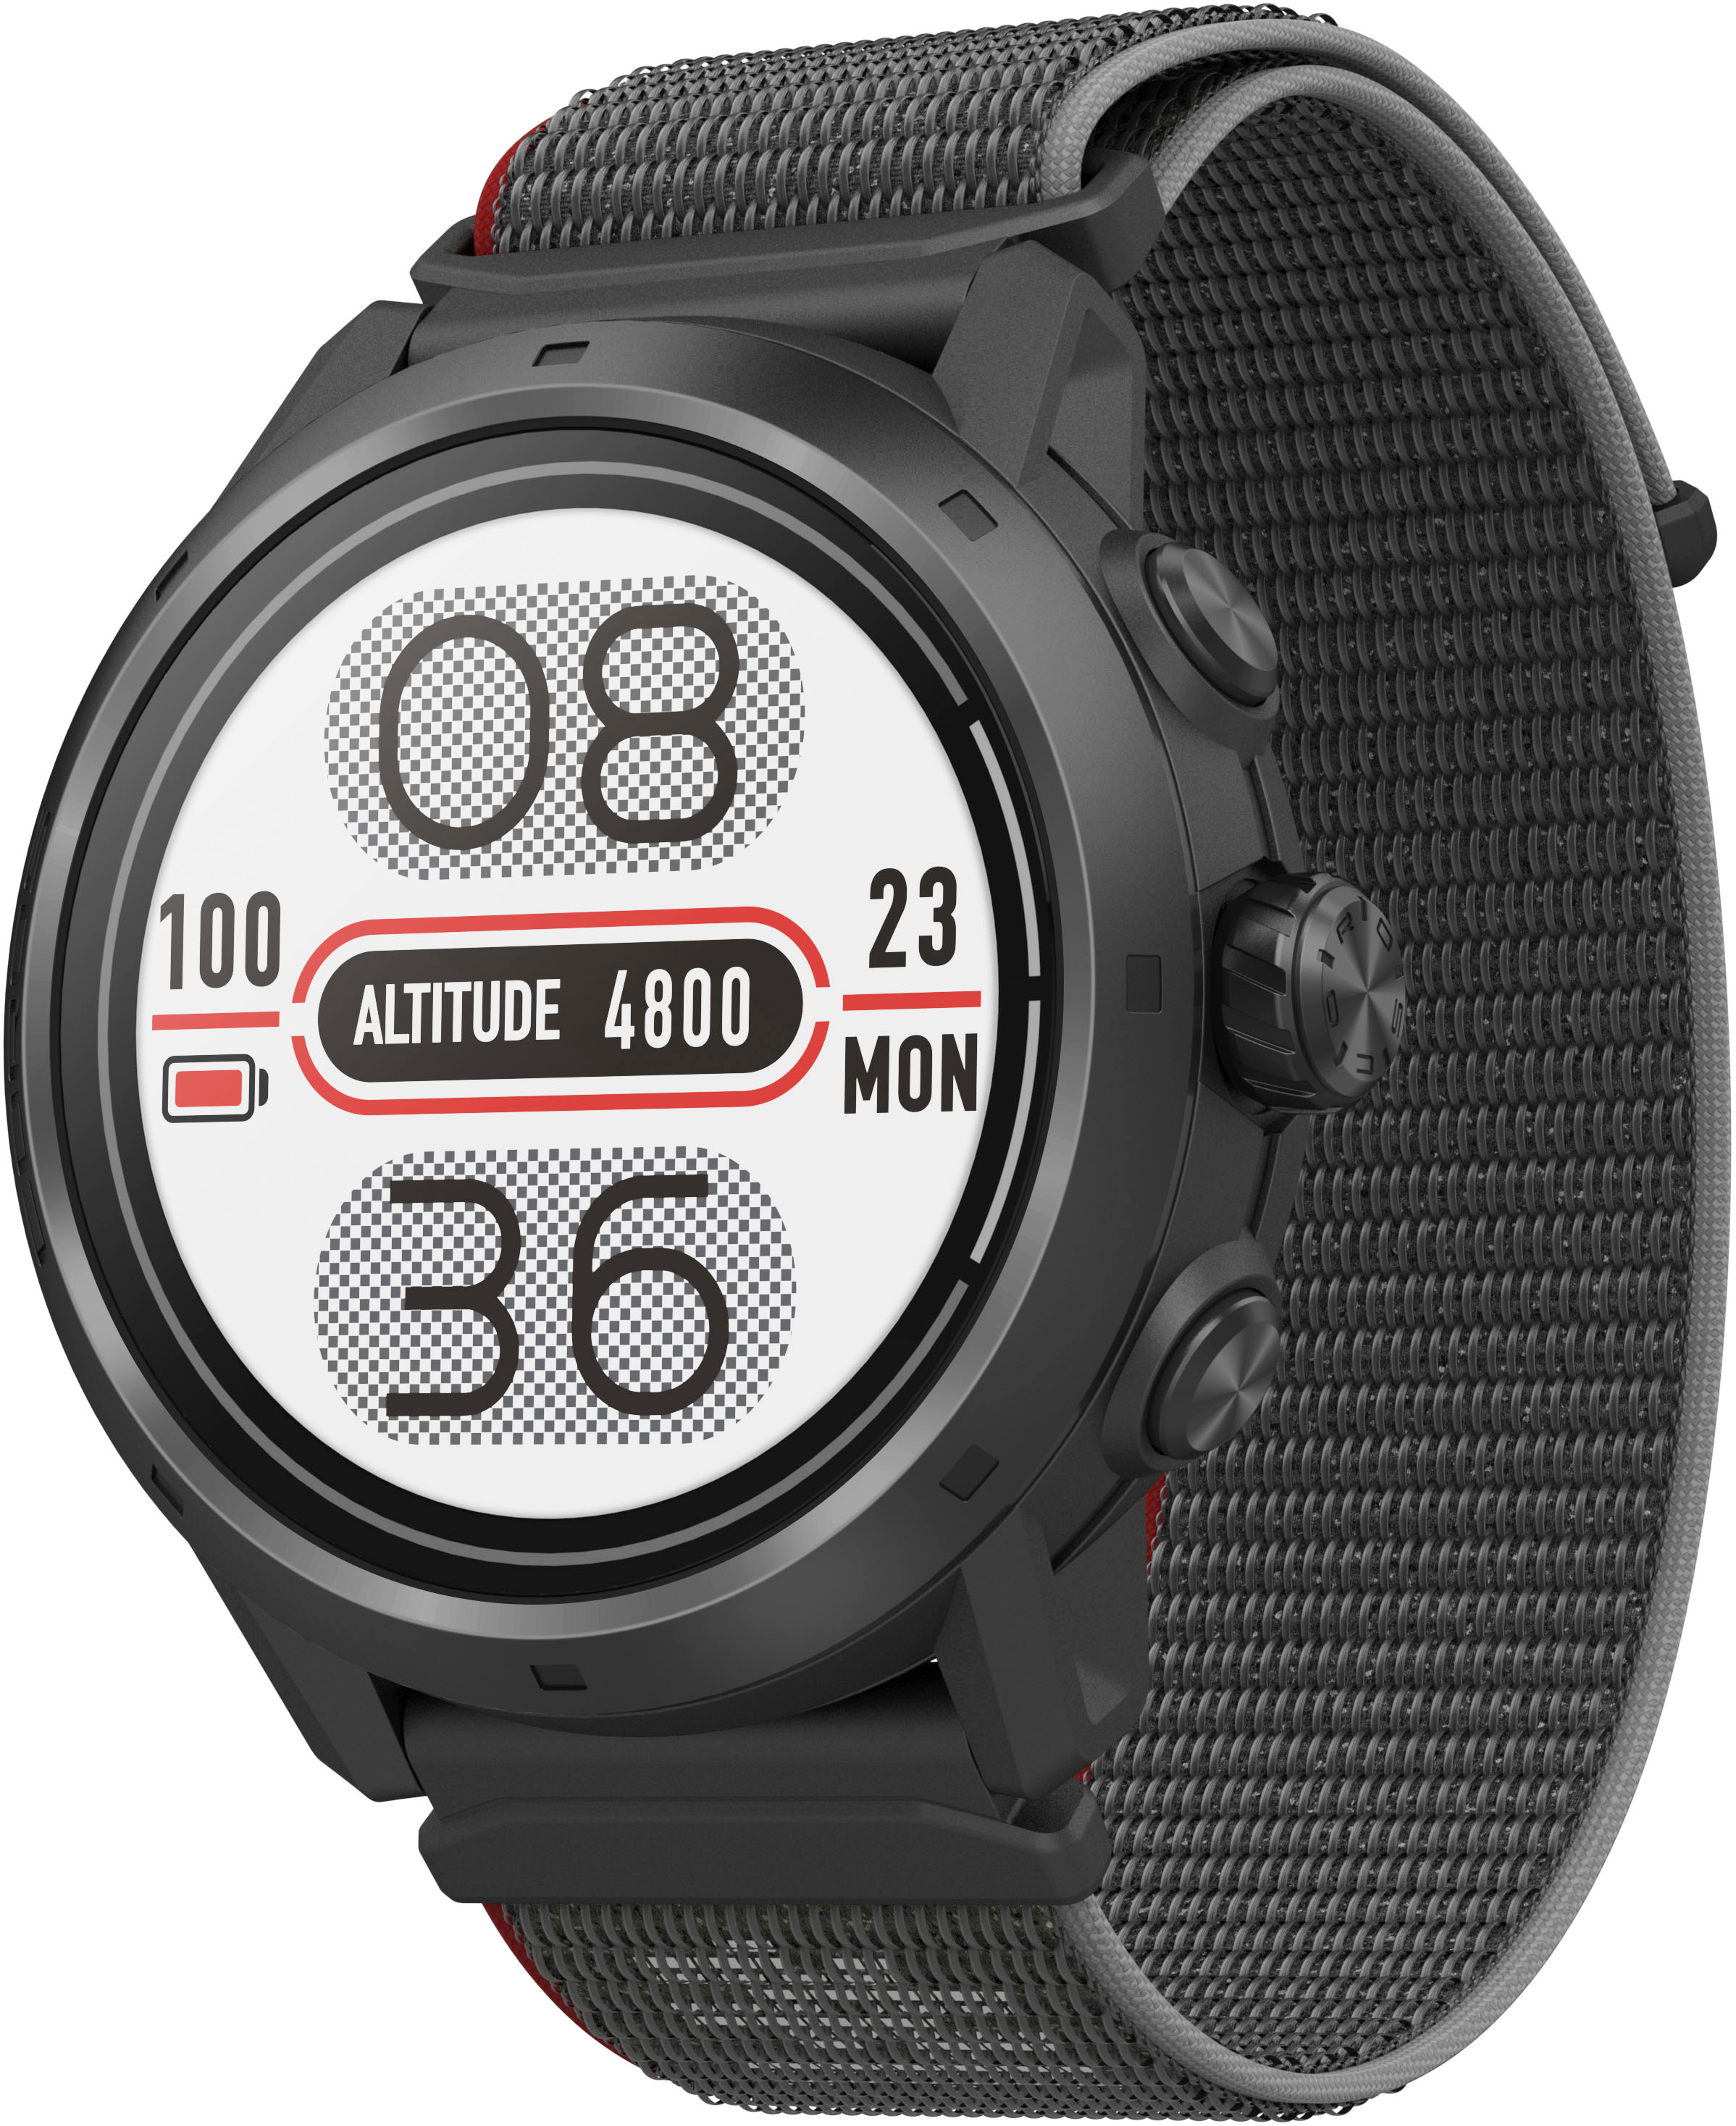 Suunto on X: Set your goals and show your style. We are bringing